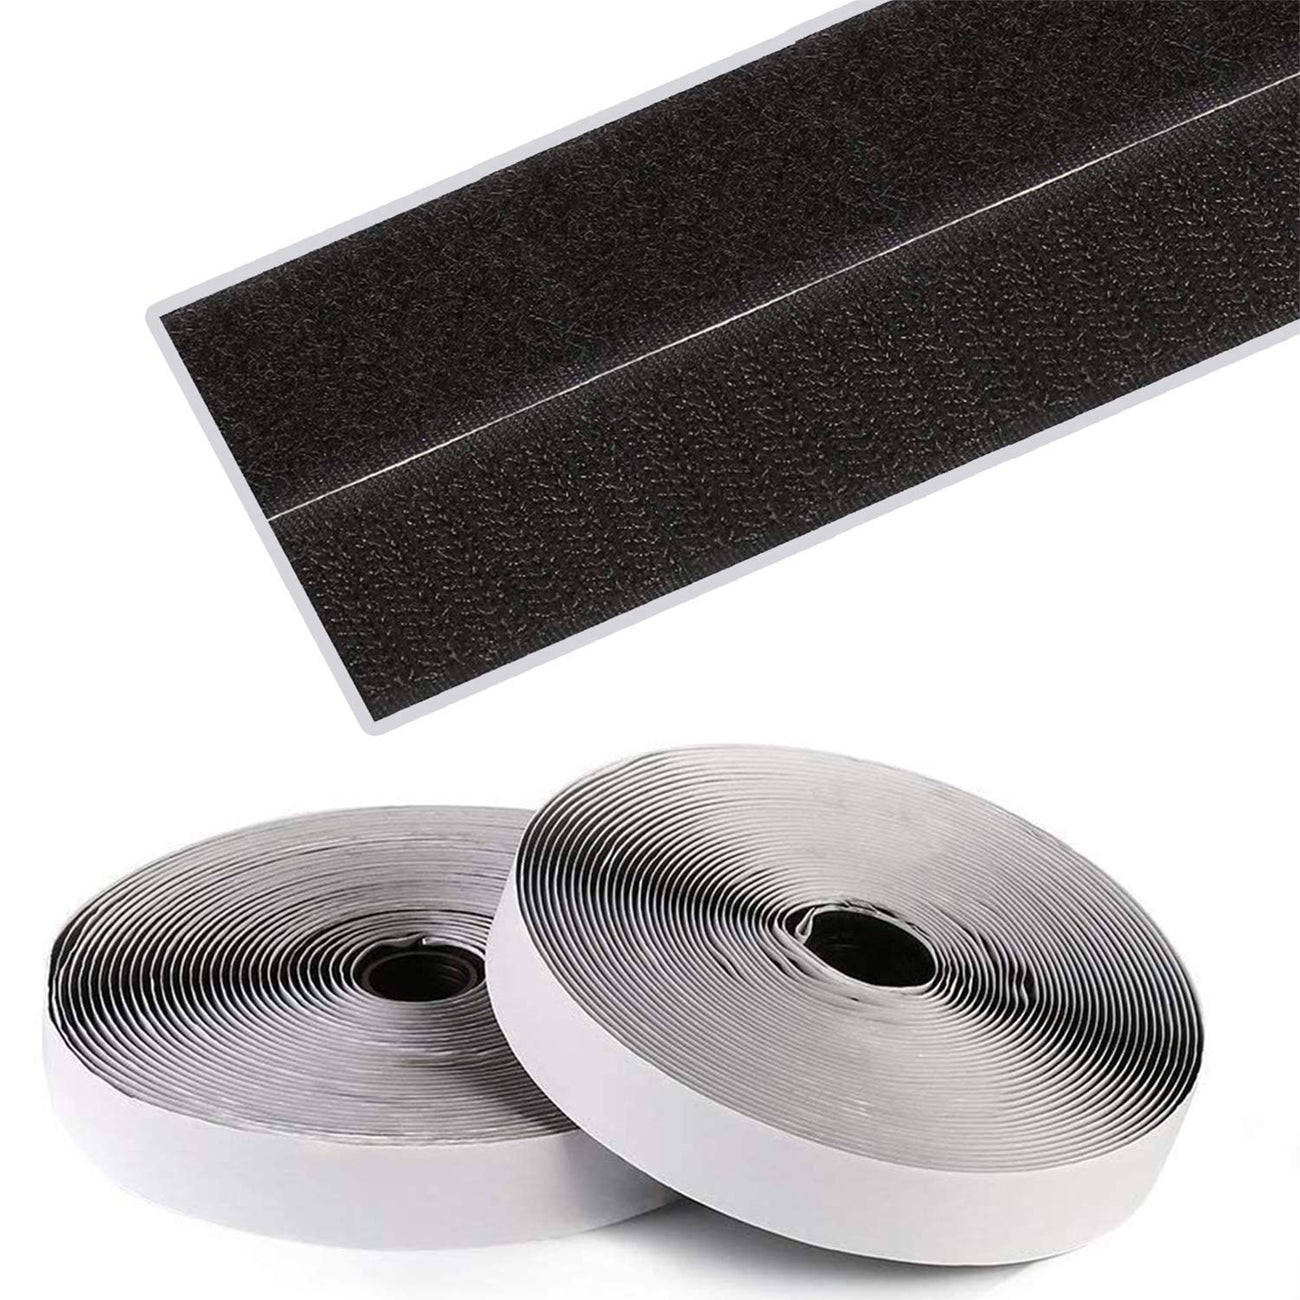 Self Adhesive Velcro Negative for Trio skirt *MUST ALSO ORDER PH973* -  Energyst Solutions